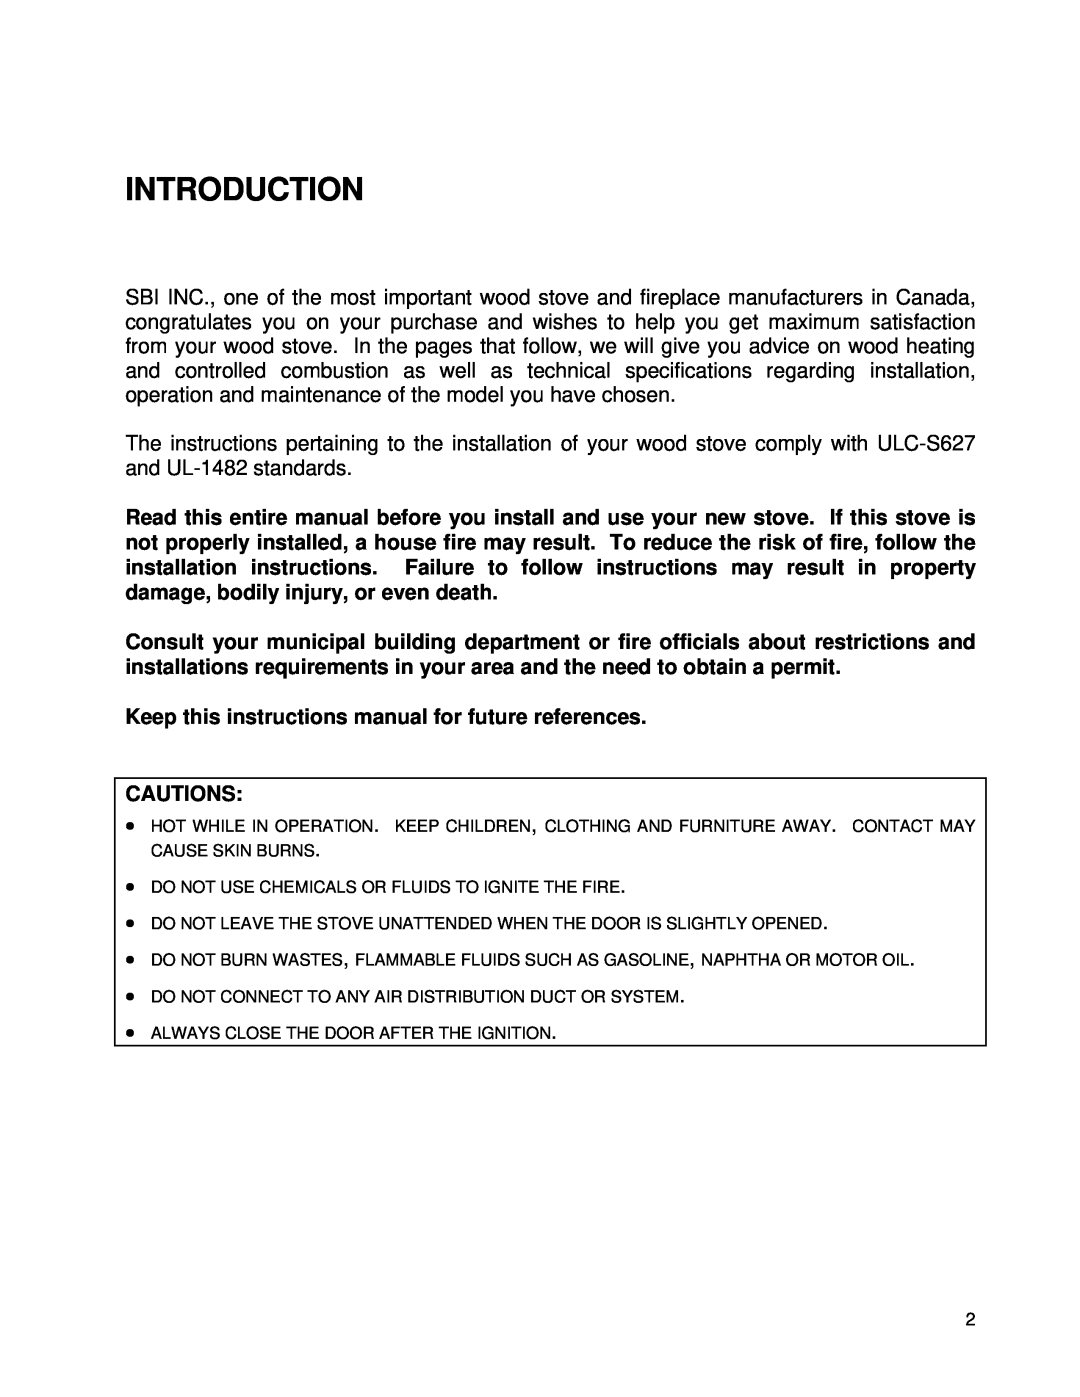 Drolet WOODSTOVES owner manual Introduction 